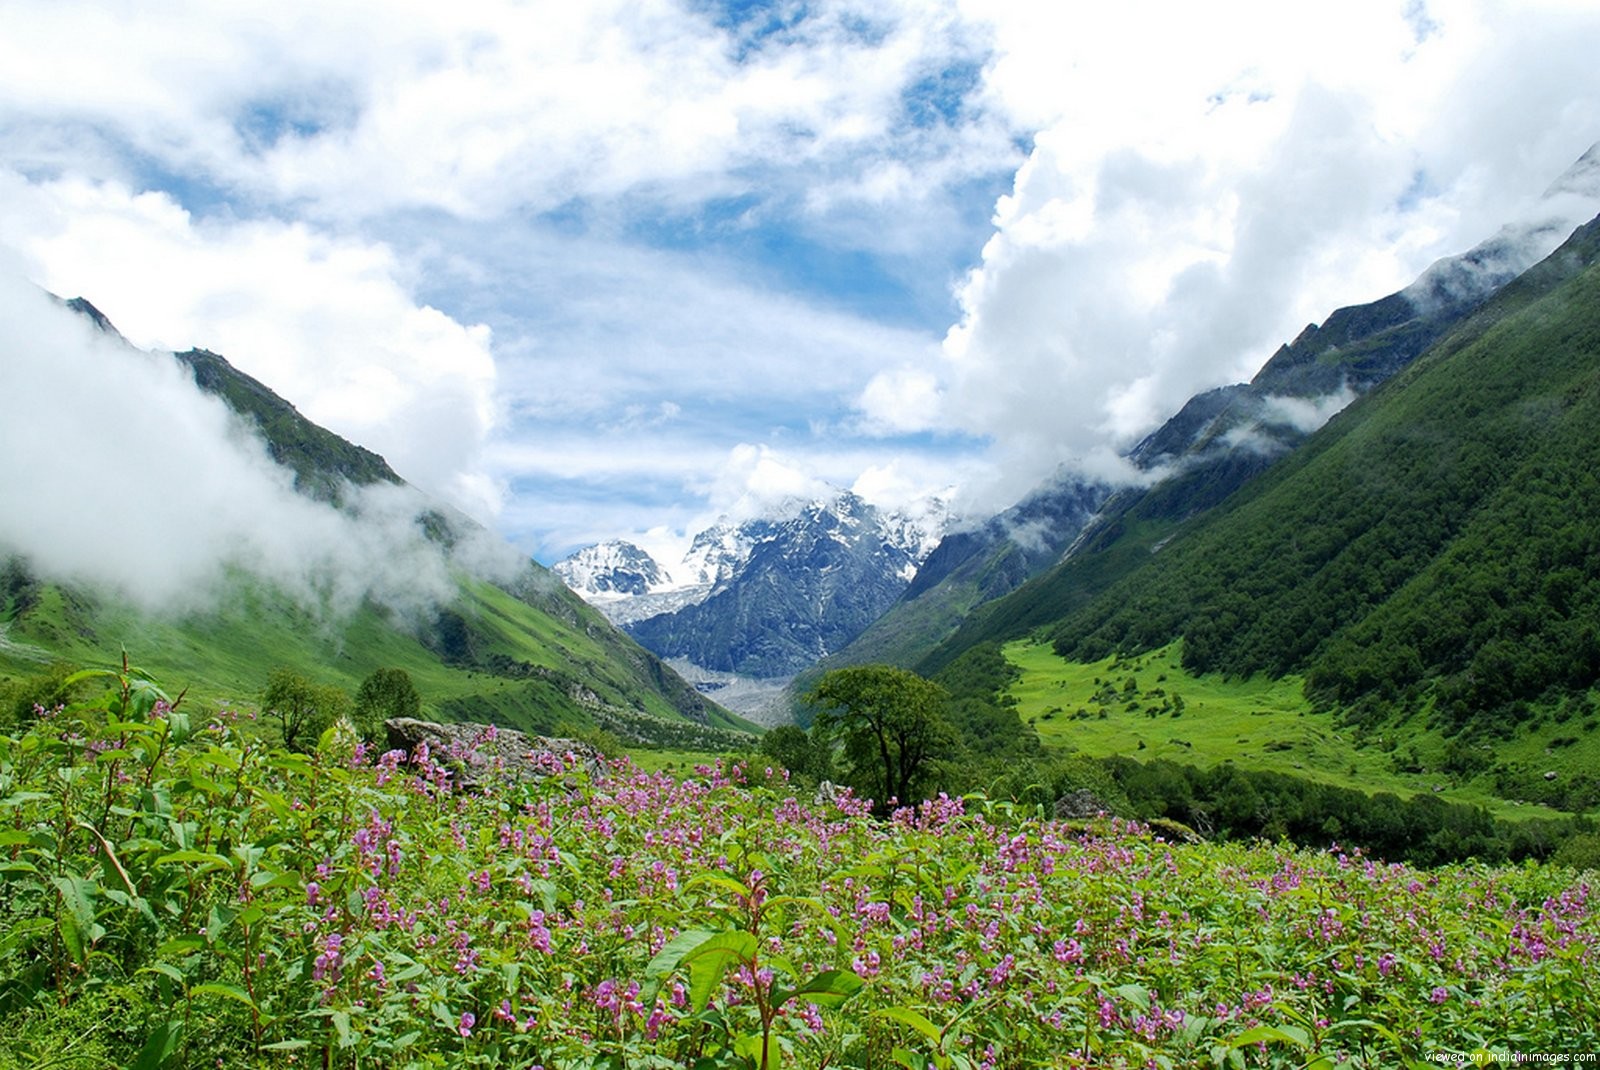 Himalayan Trek to the Valley of Flowers